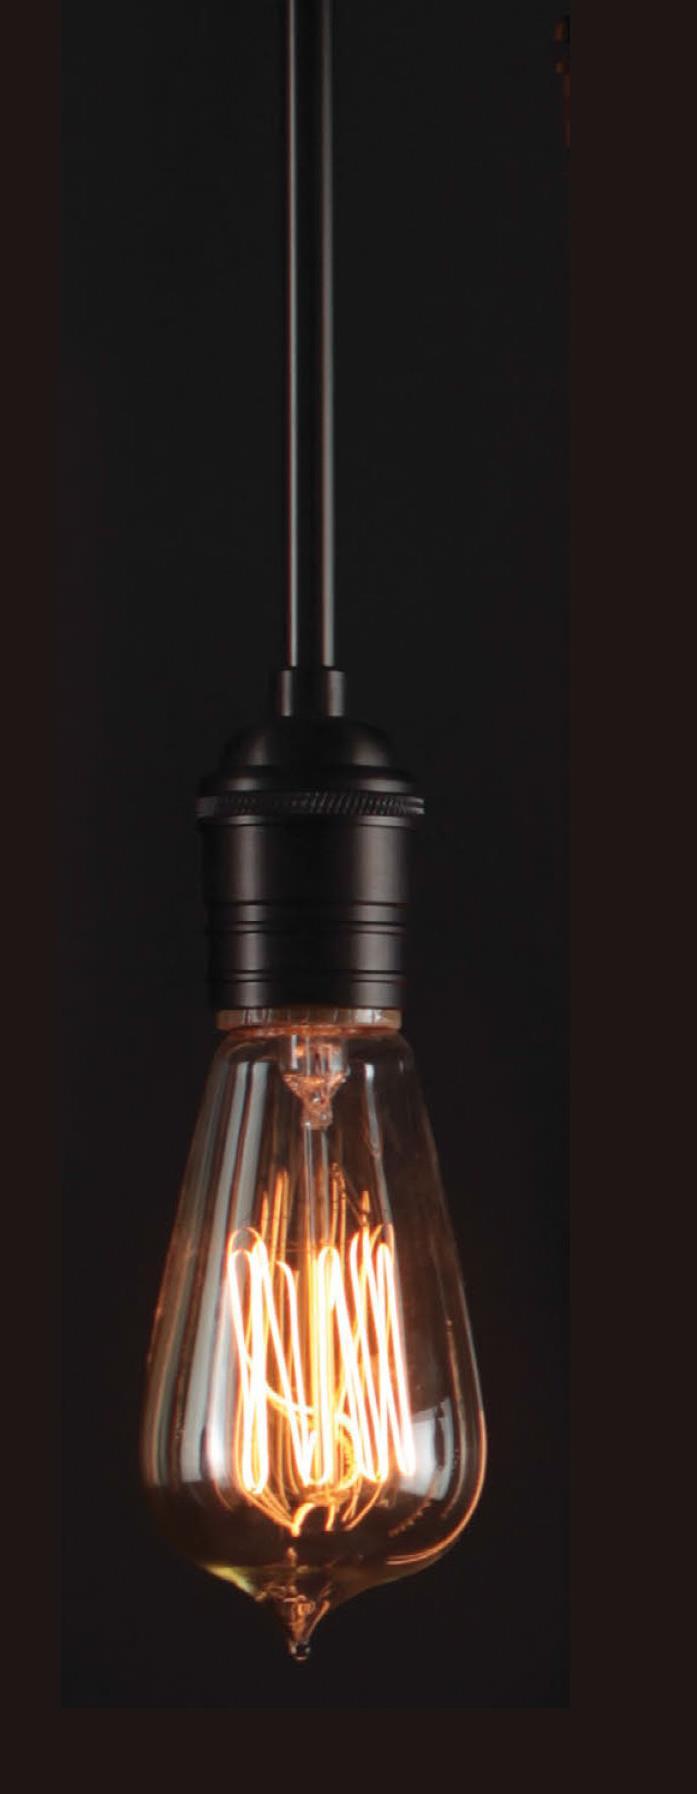 Inventions Edison s technological achievements were used by other inventors, as evidenced by the development of long-distance electricity transmission, which enabled Edison s electric light to